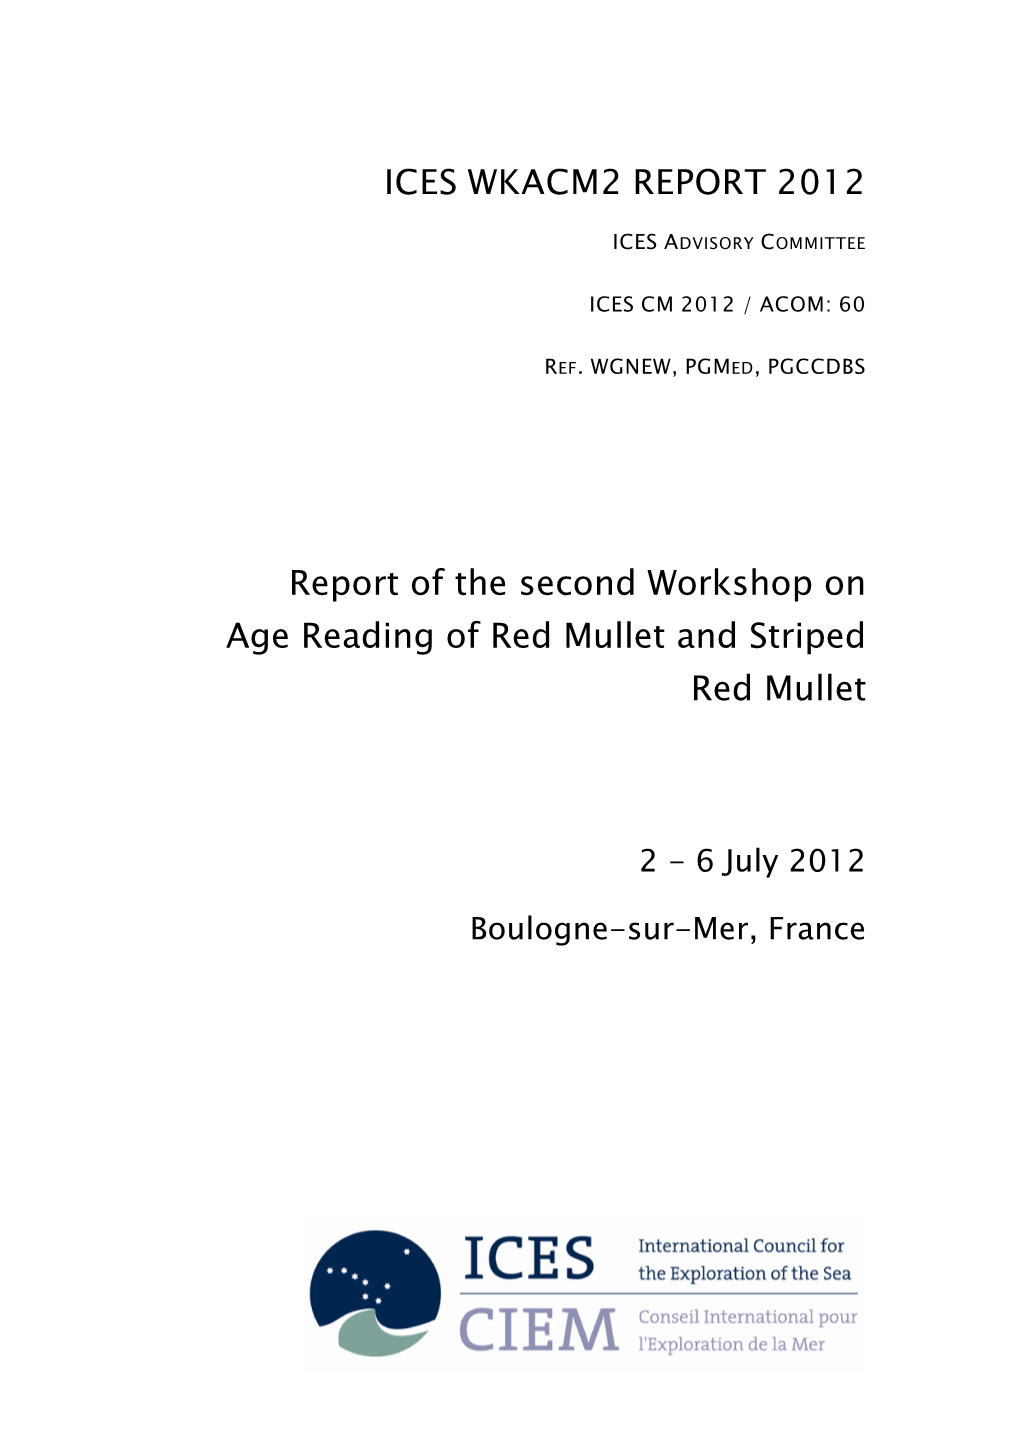 Report of the Workshop on Age Reading of Red Mullet and Striped Red Mul- Let, 2–6 July 2012, Boulogne-Sur-Mer, France